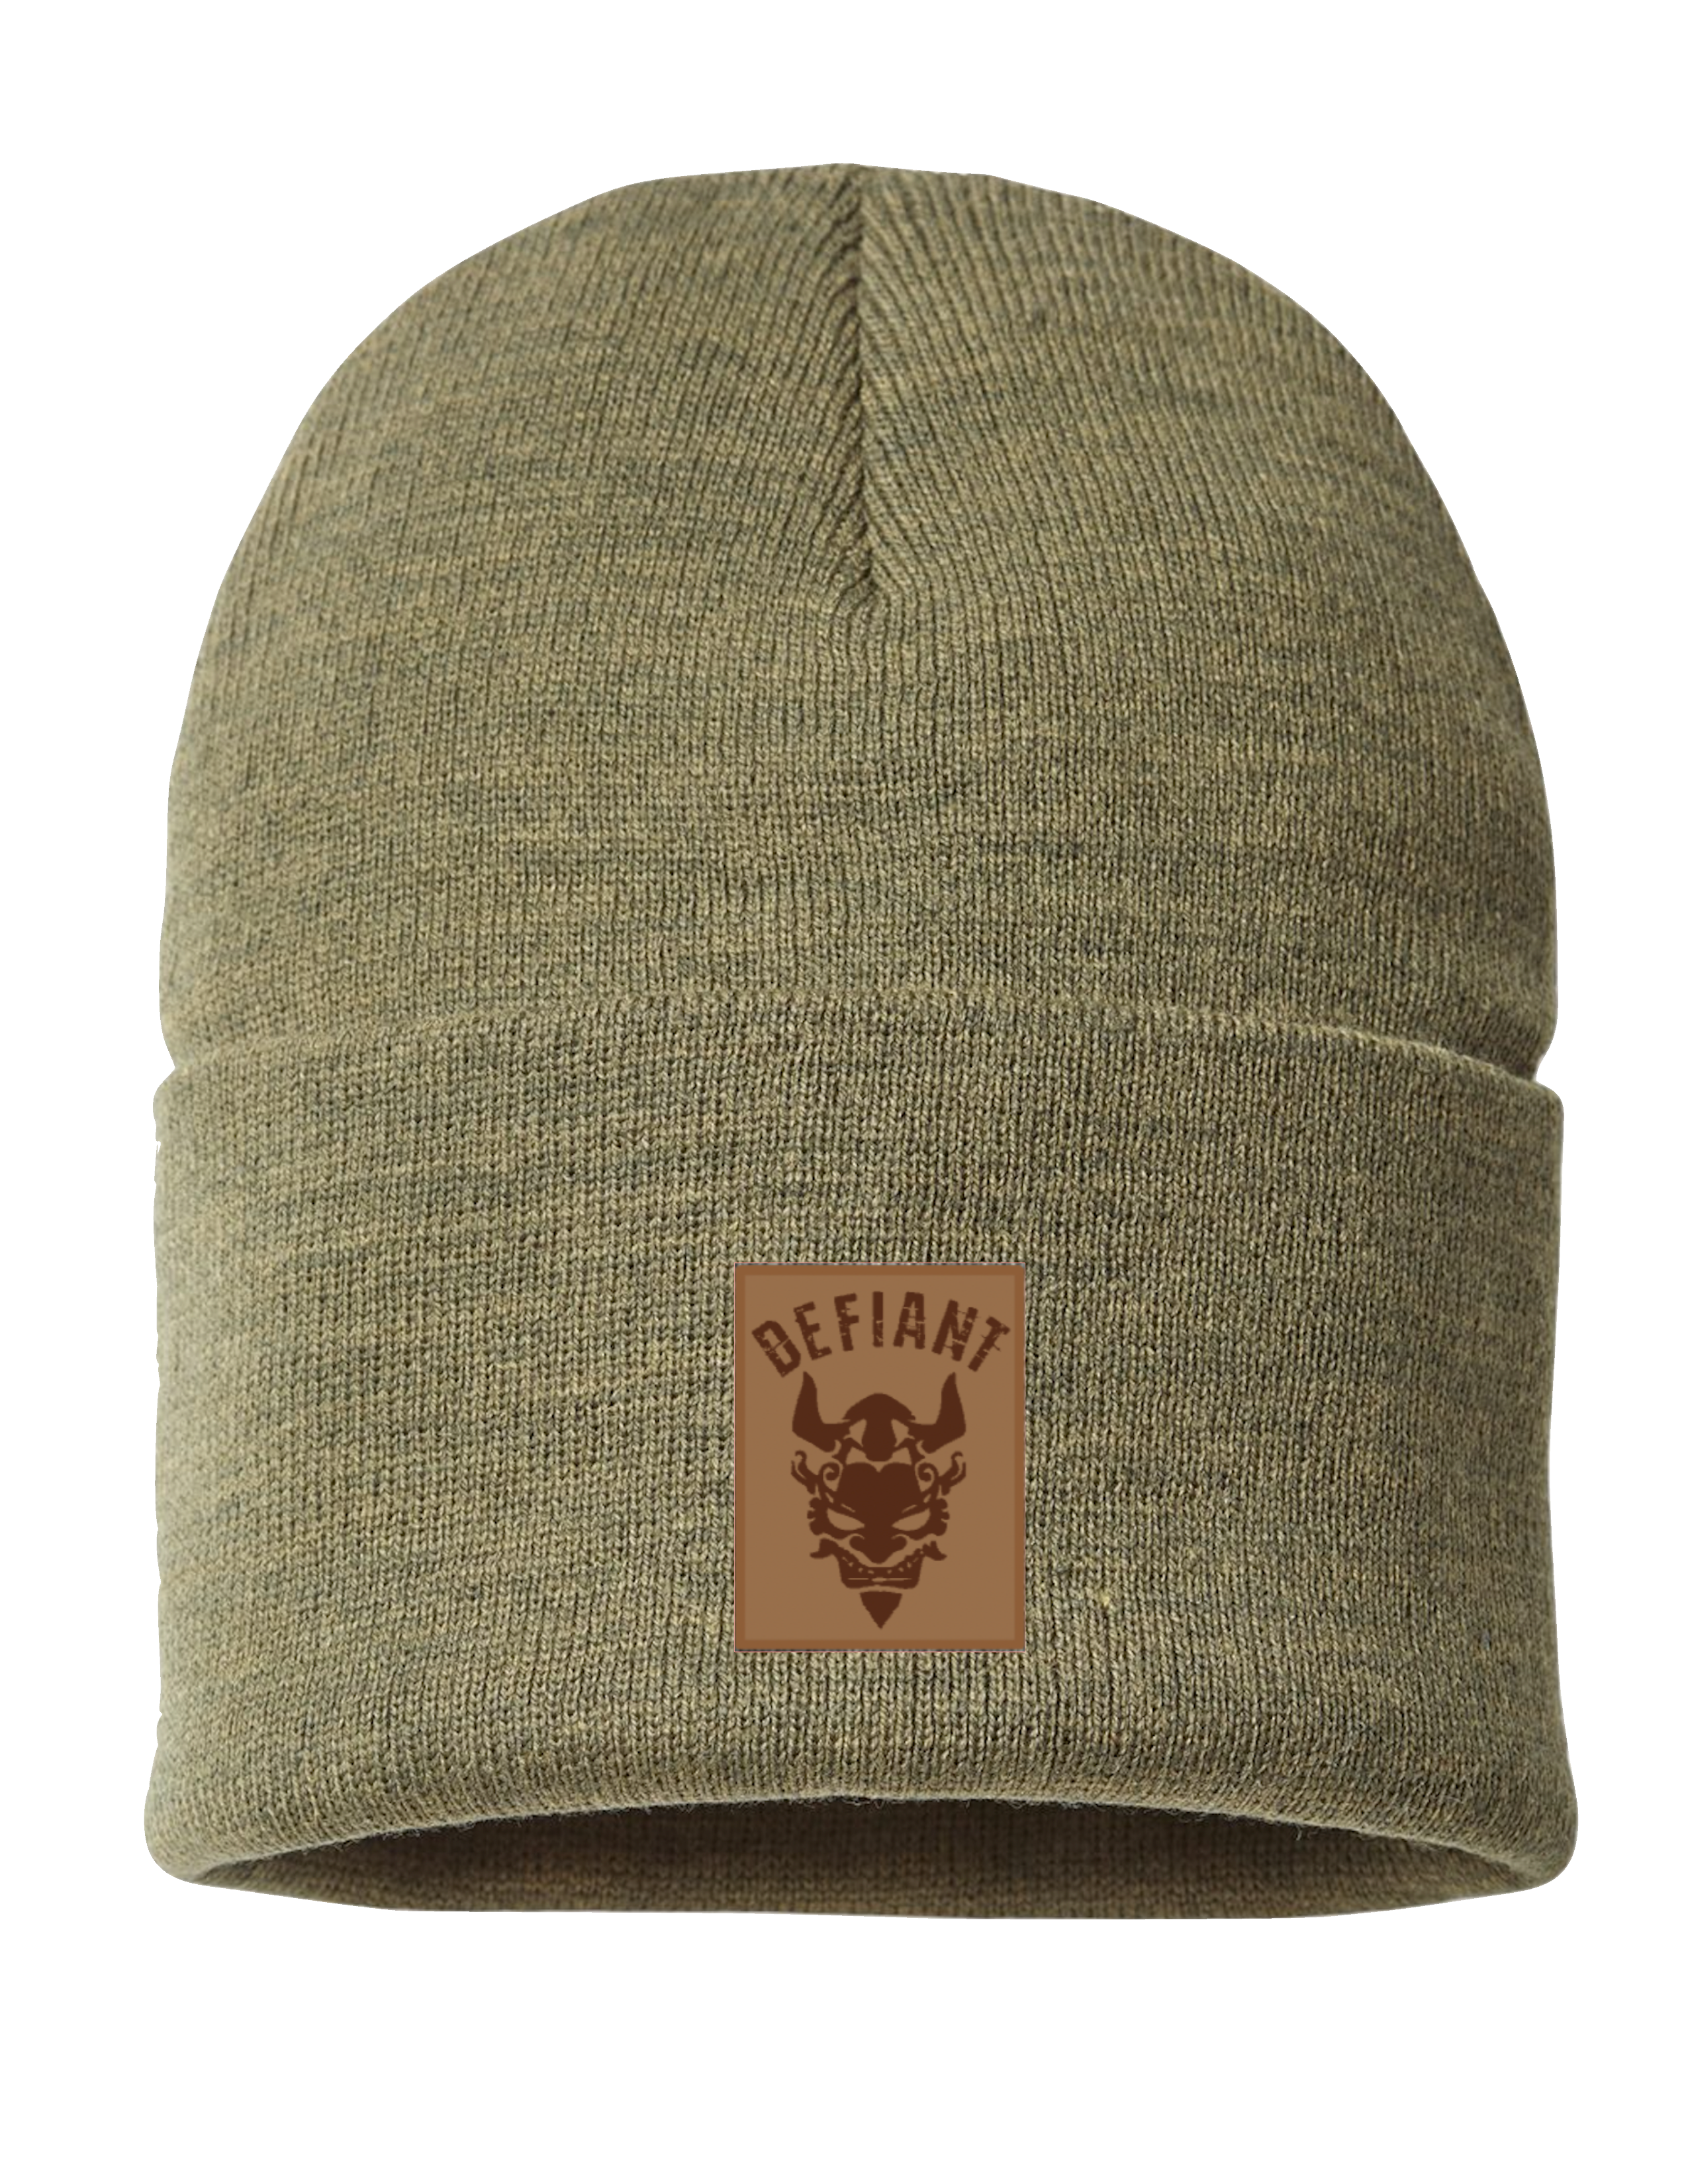 CLASSIC CUFFED BEANIE HAT - with DEFIANT LEATHER PATCH - XL OLIVE